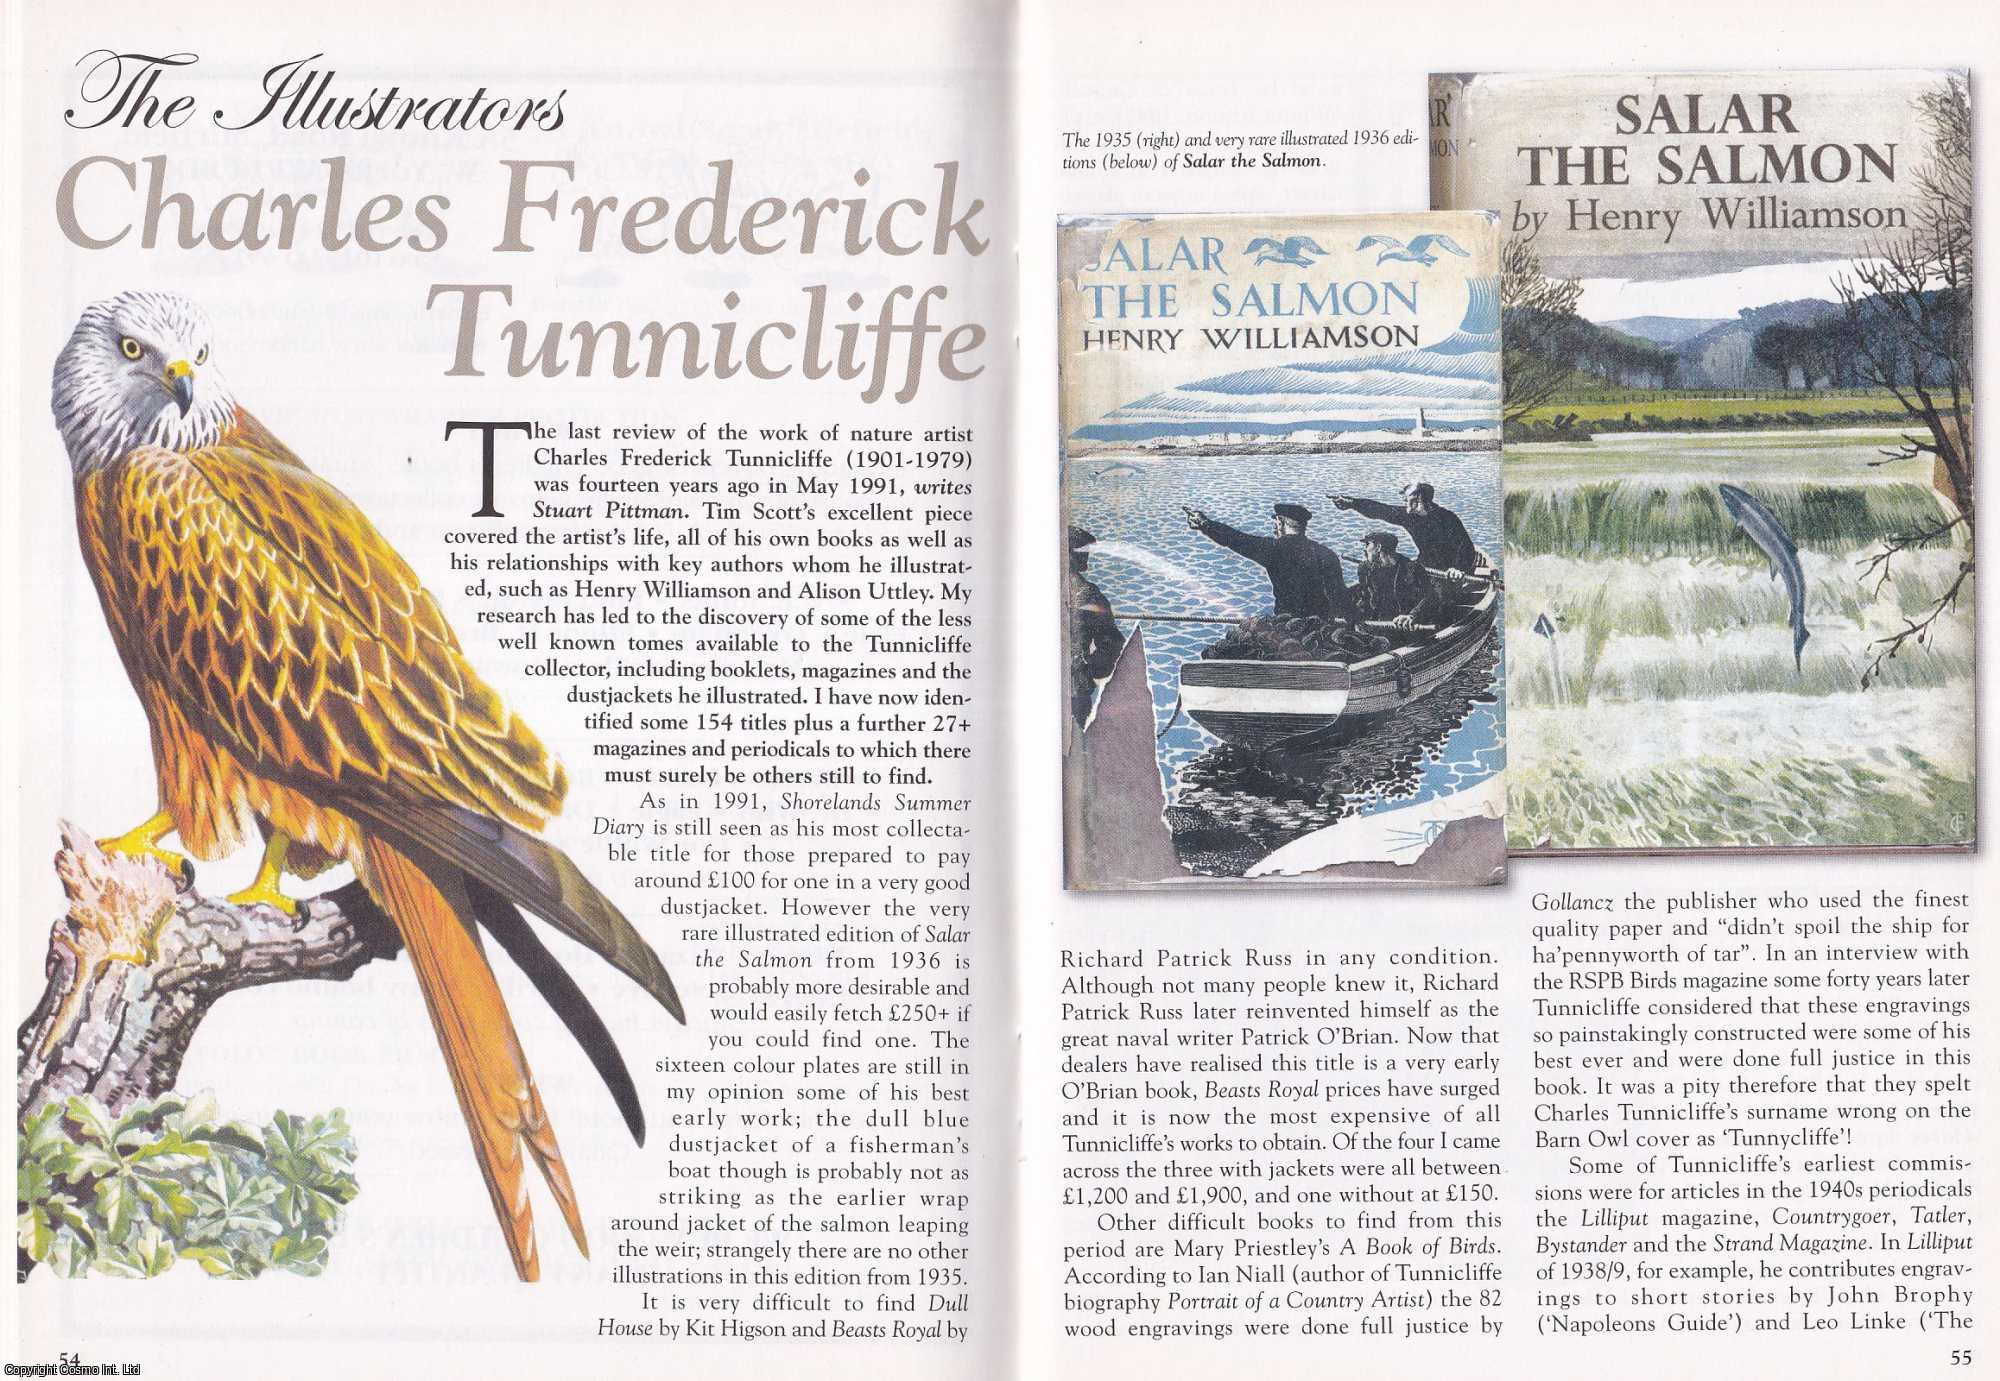 --- - Charles Frederick Tunnicliffe. This is an original article separated from an issue of The Book & Magazine Collector publication.